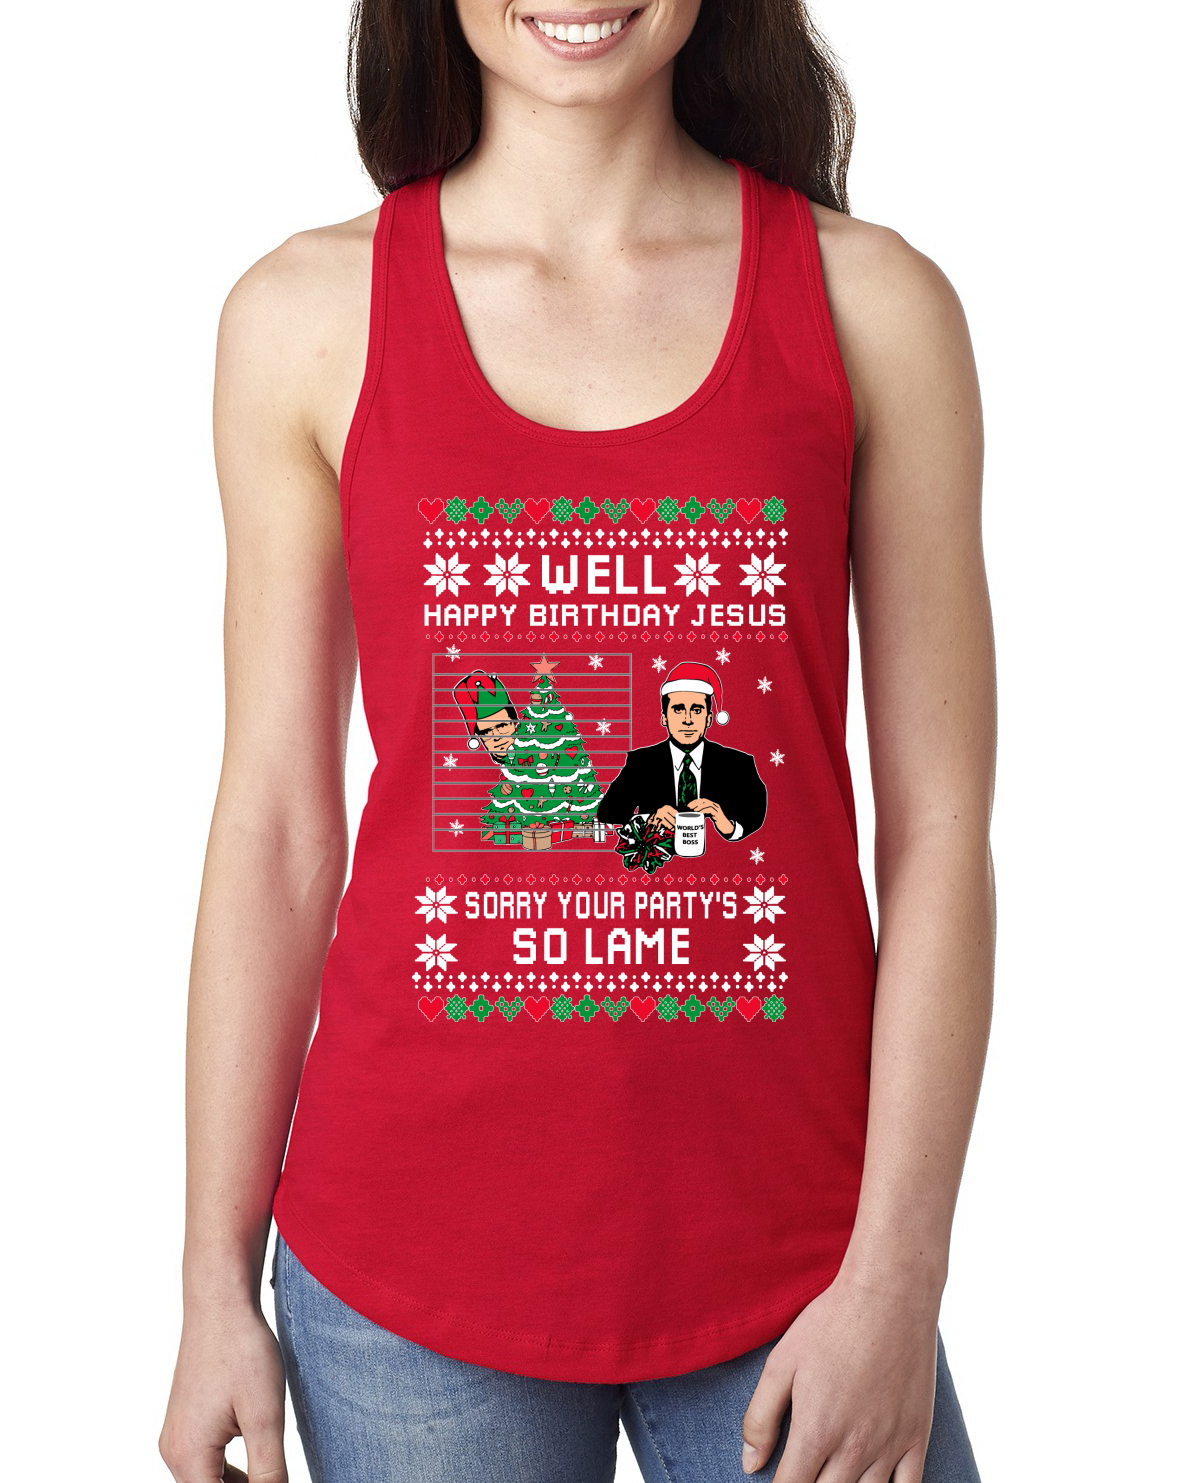 Wild Bobby Well Happy Birthday Jesus Funny Quote Office Ugly Christmas Ladies Racerback Tank Top, Red, Medium - image 1 of 3